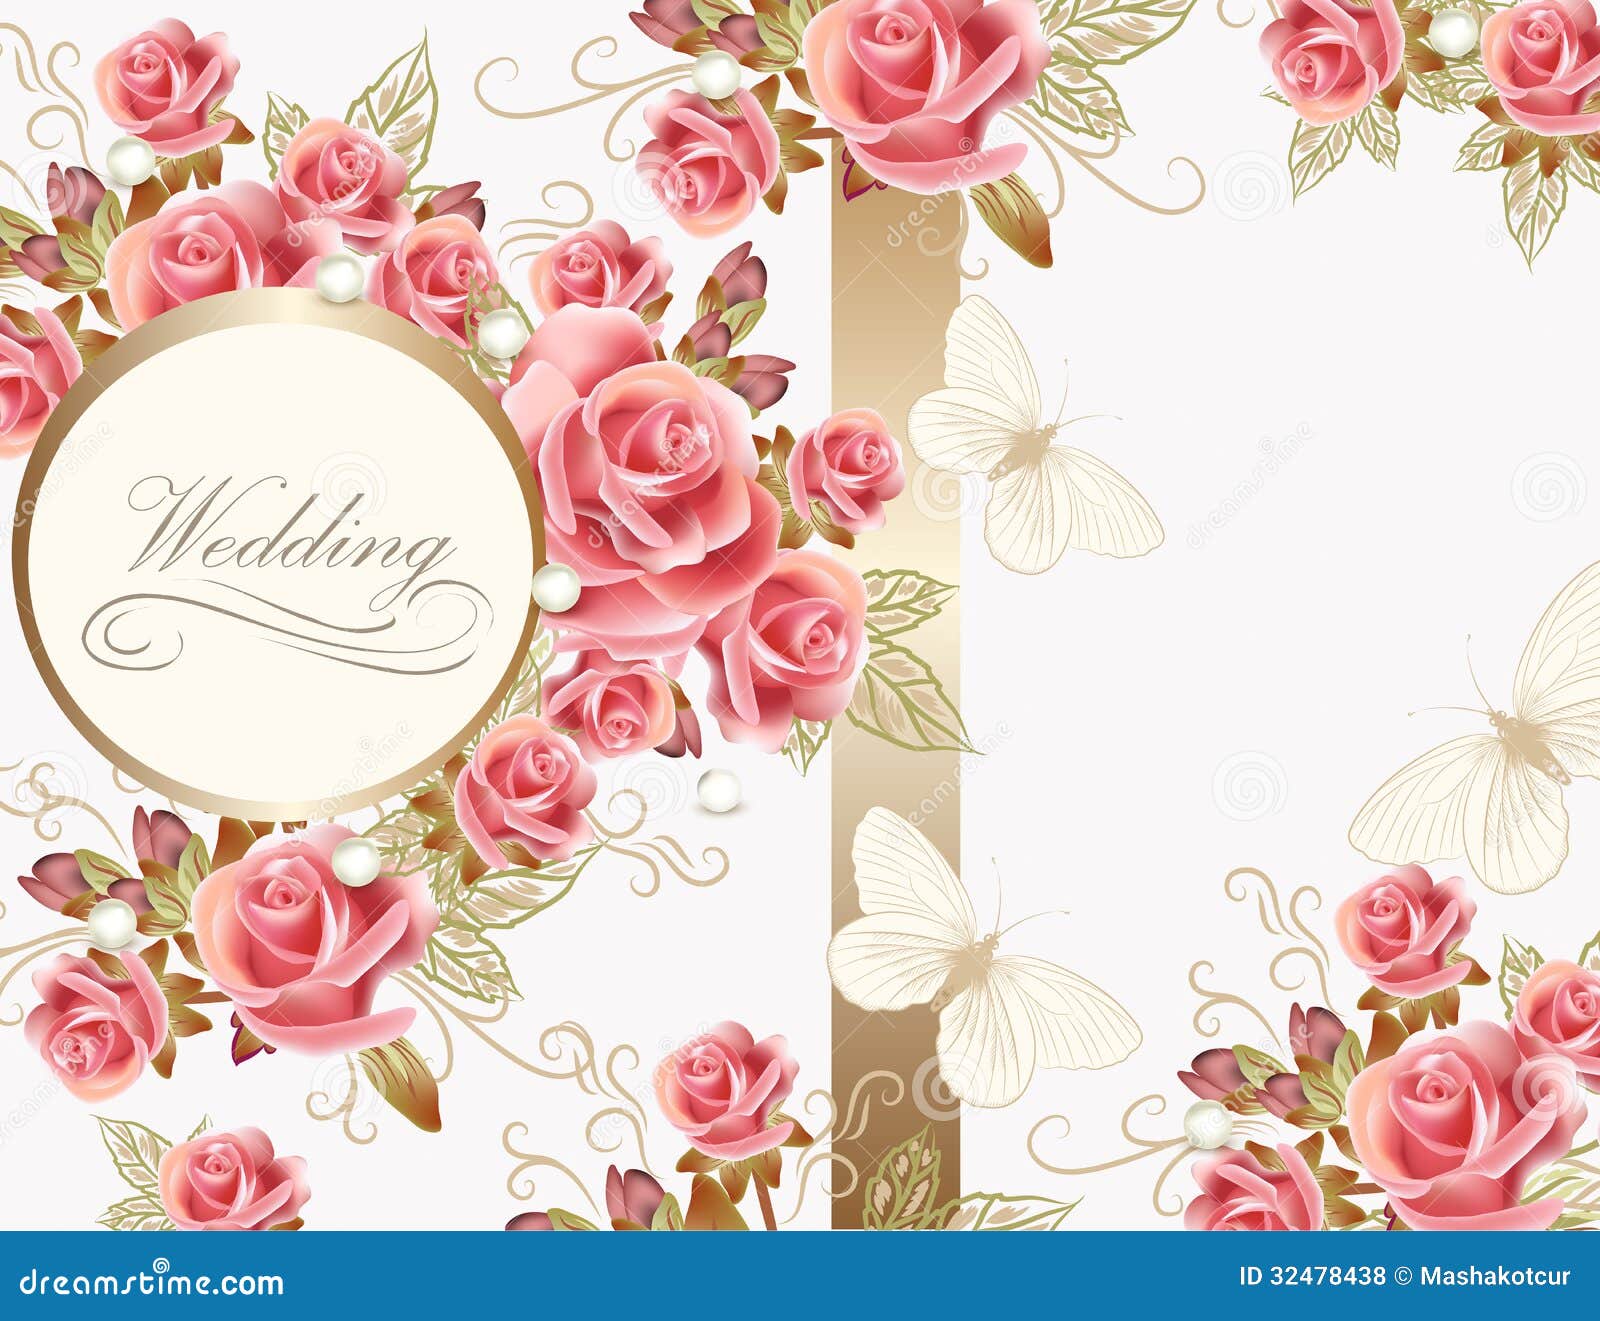 Wedding vector greeting card with pink roses in vintage style for ...